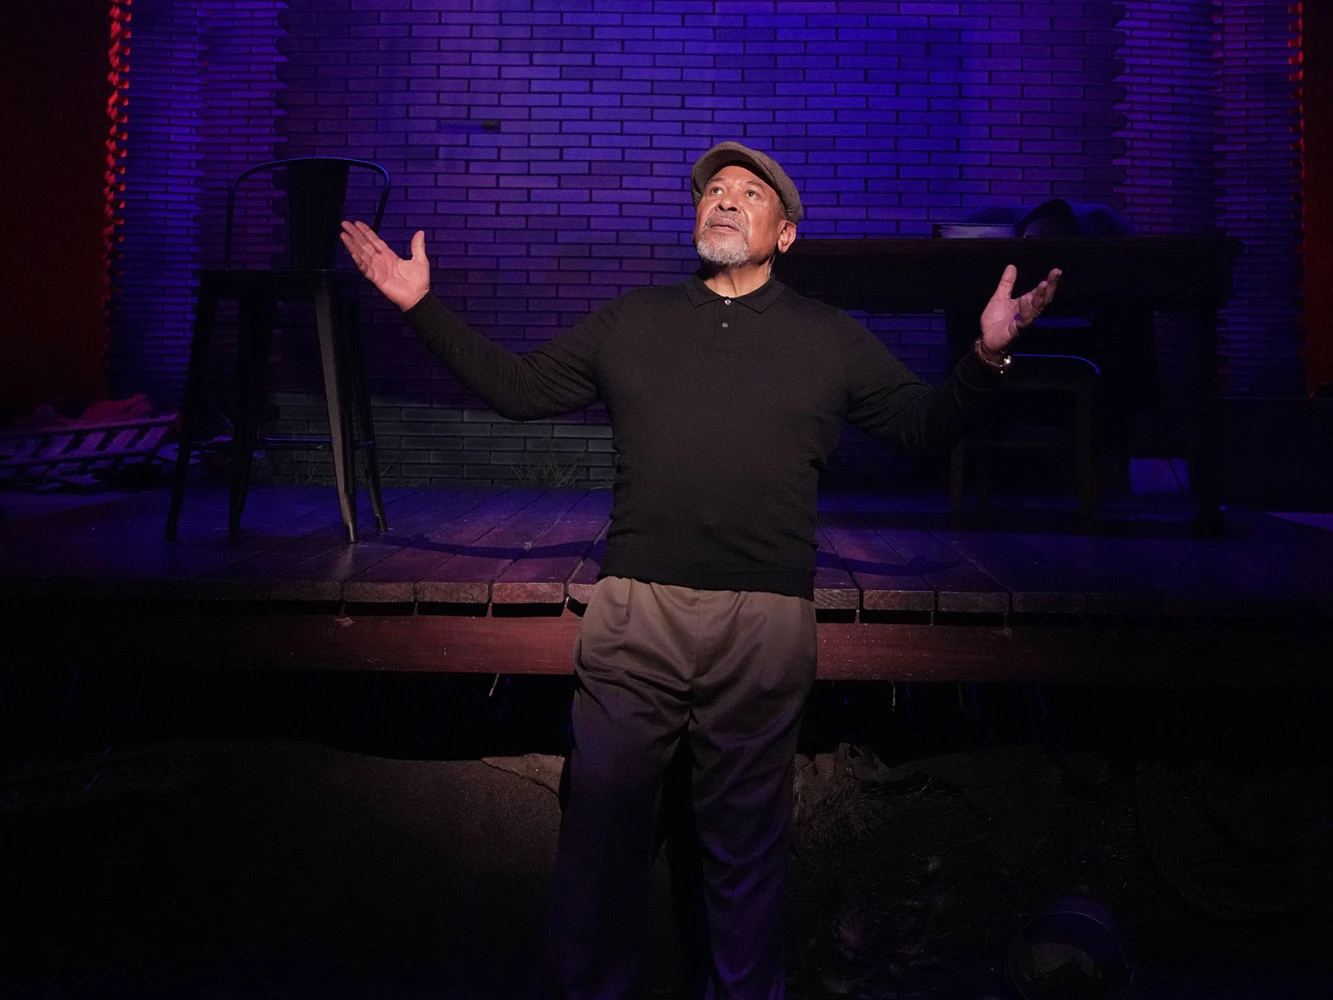 August Wilson's How I Learned What I Learned: What to expect - 2